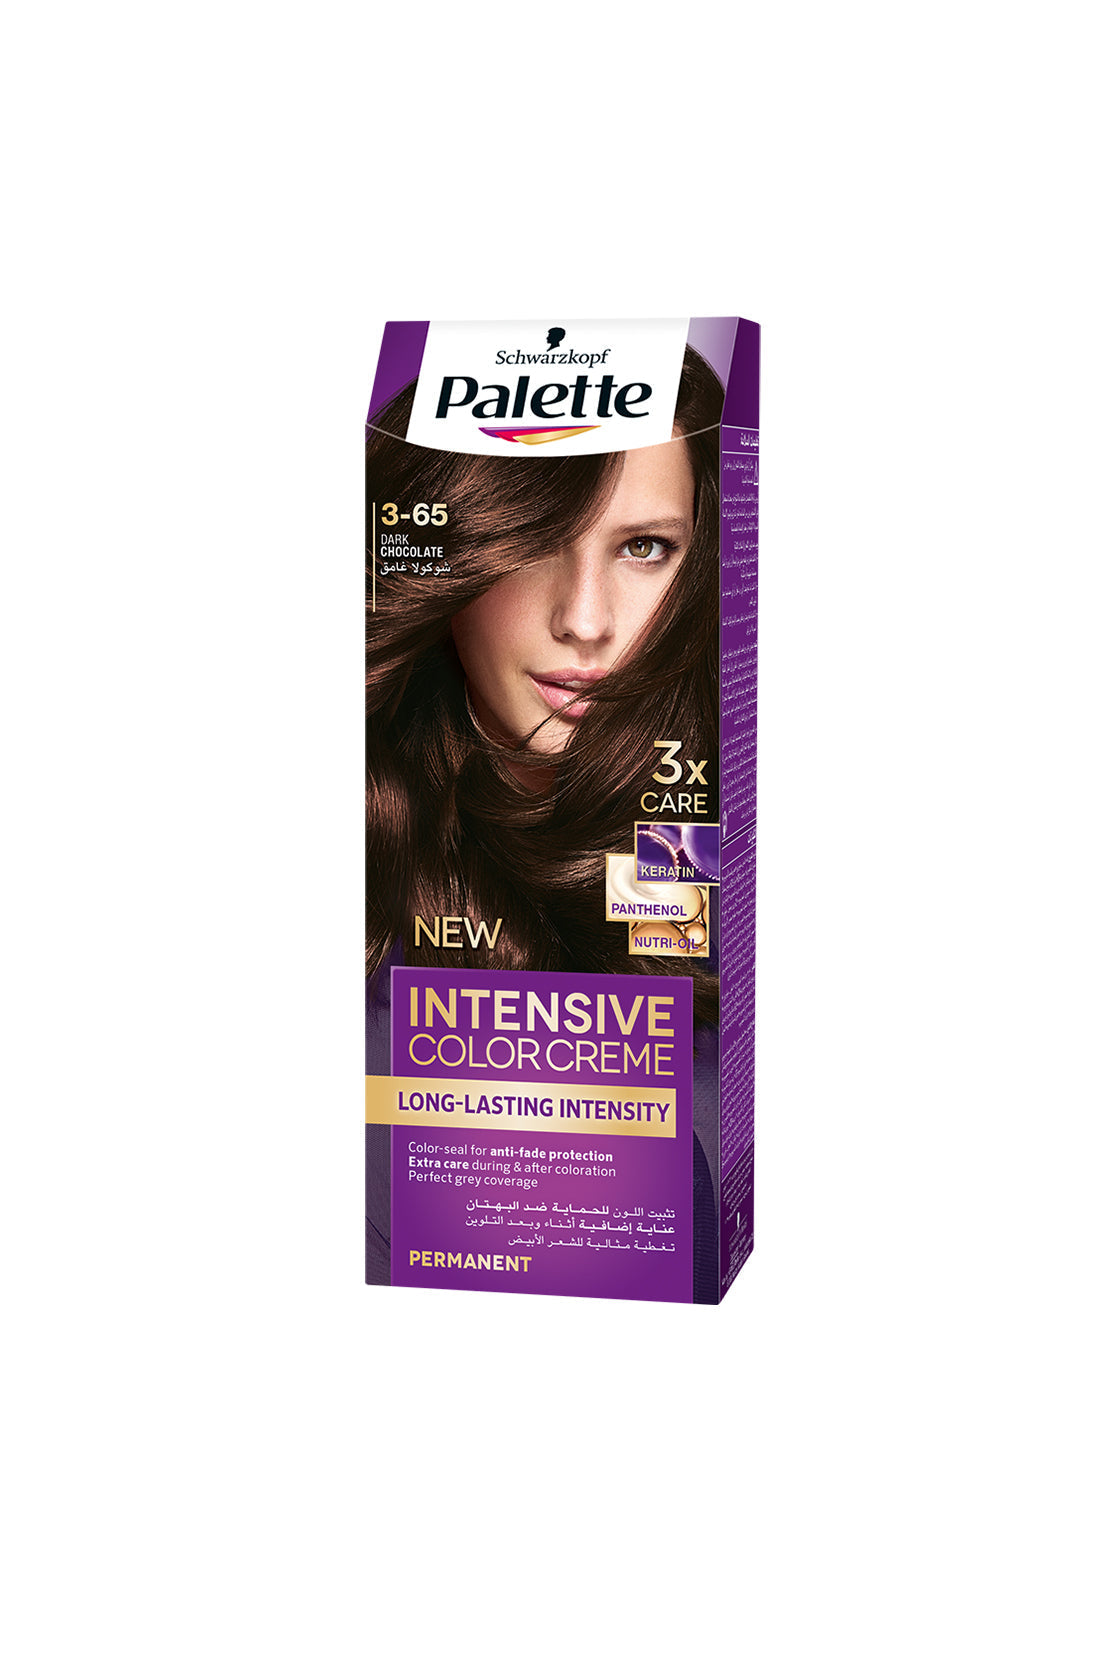 Intensive Color Creme with Long Lasting Intensity (3-65 Dark Chocolate) RIOS